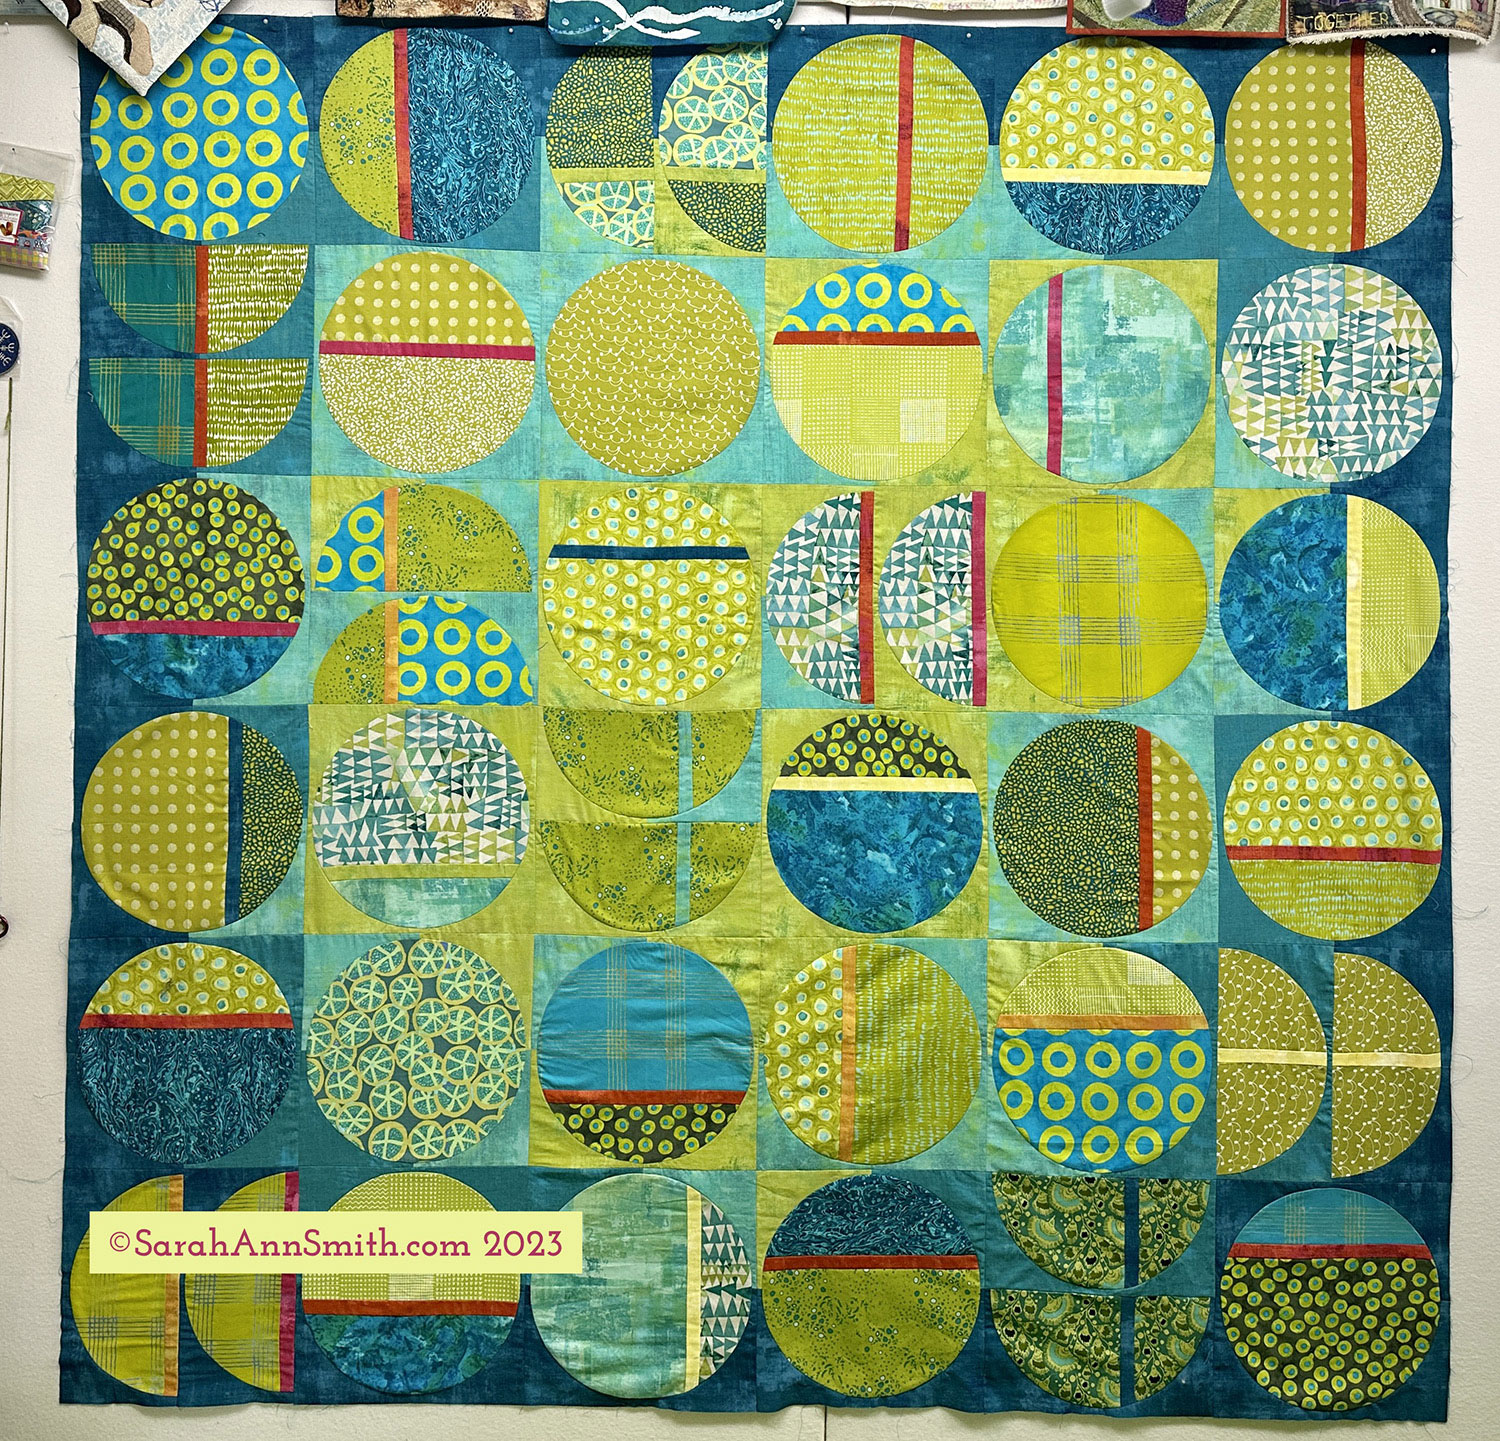 2023 Free Quilt Block Challenge - Diary of a Quilter - a quilt blog